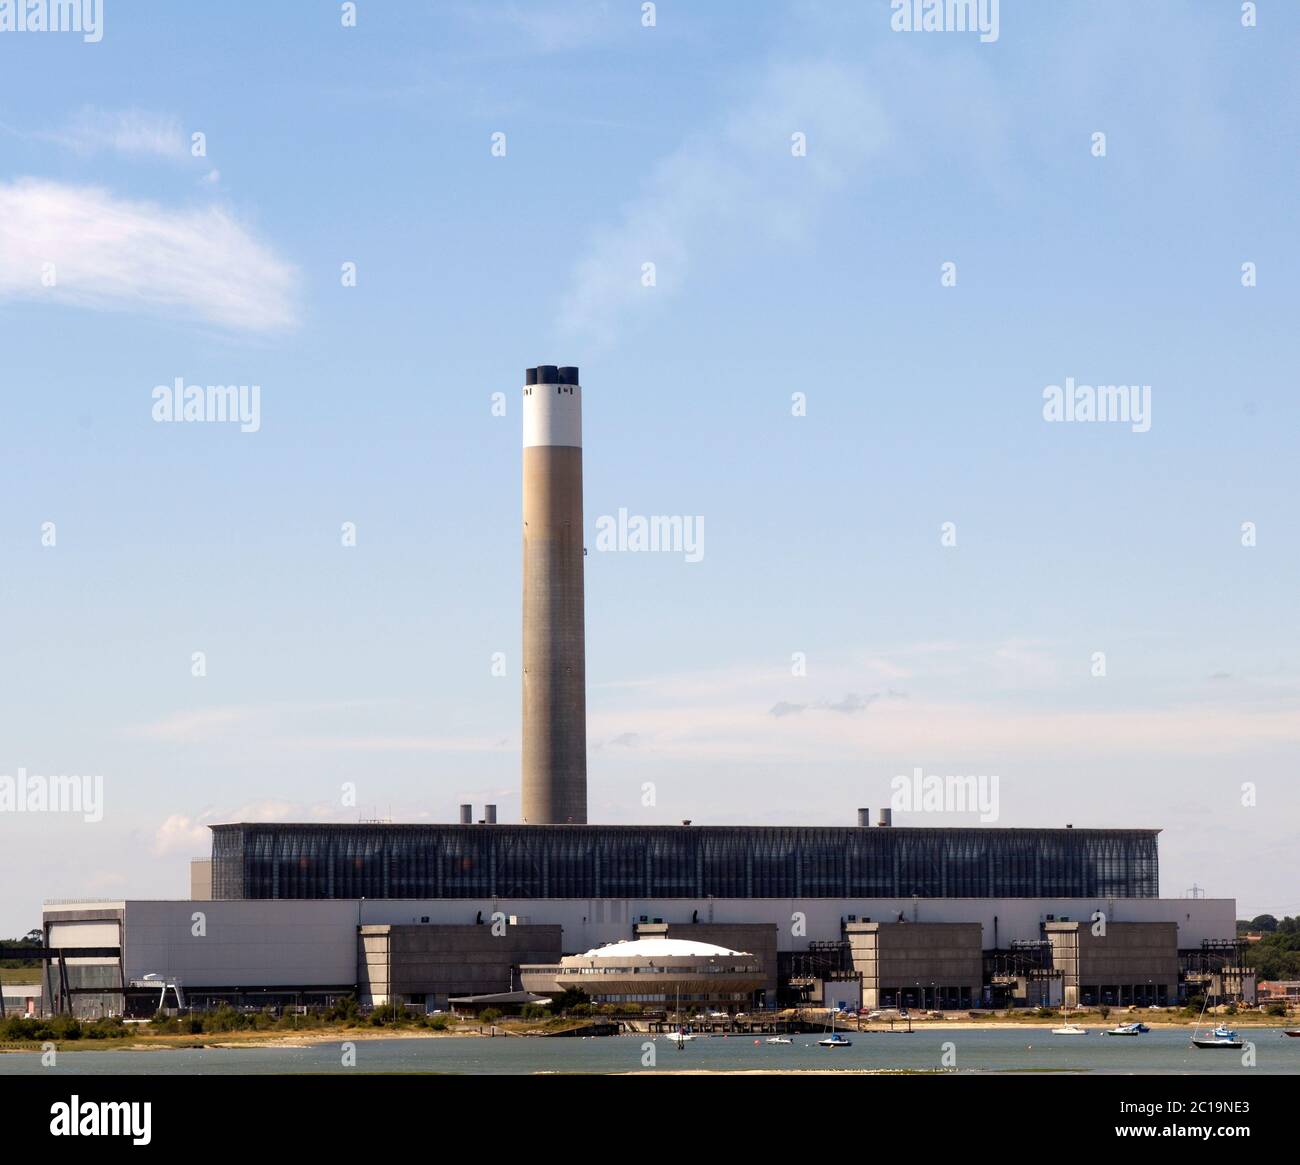 Fawley Power Station - now being decommissioned  - and demolished, Fawley, Hampshire, England, UK Stock Photo